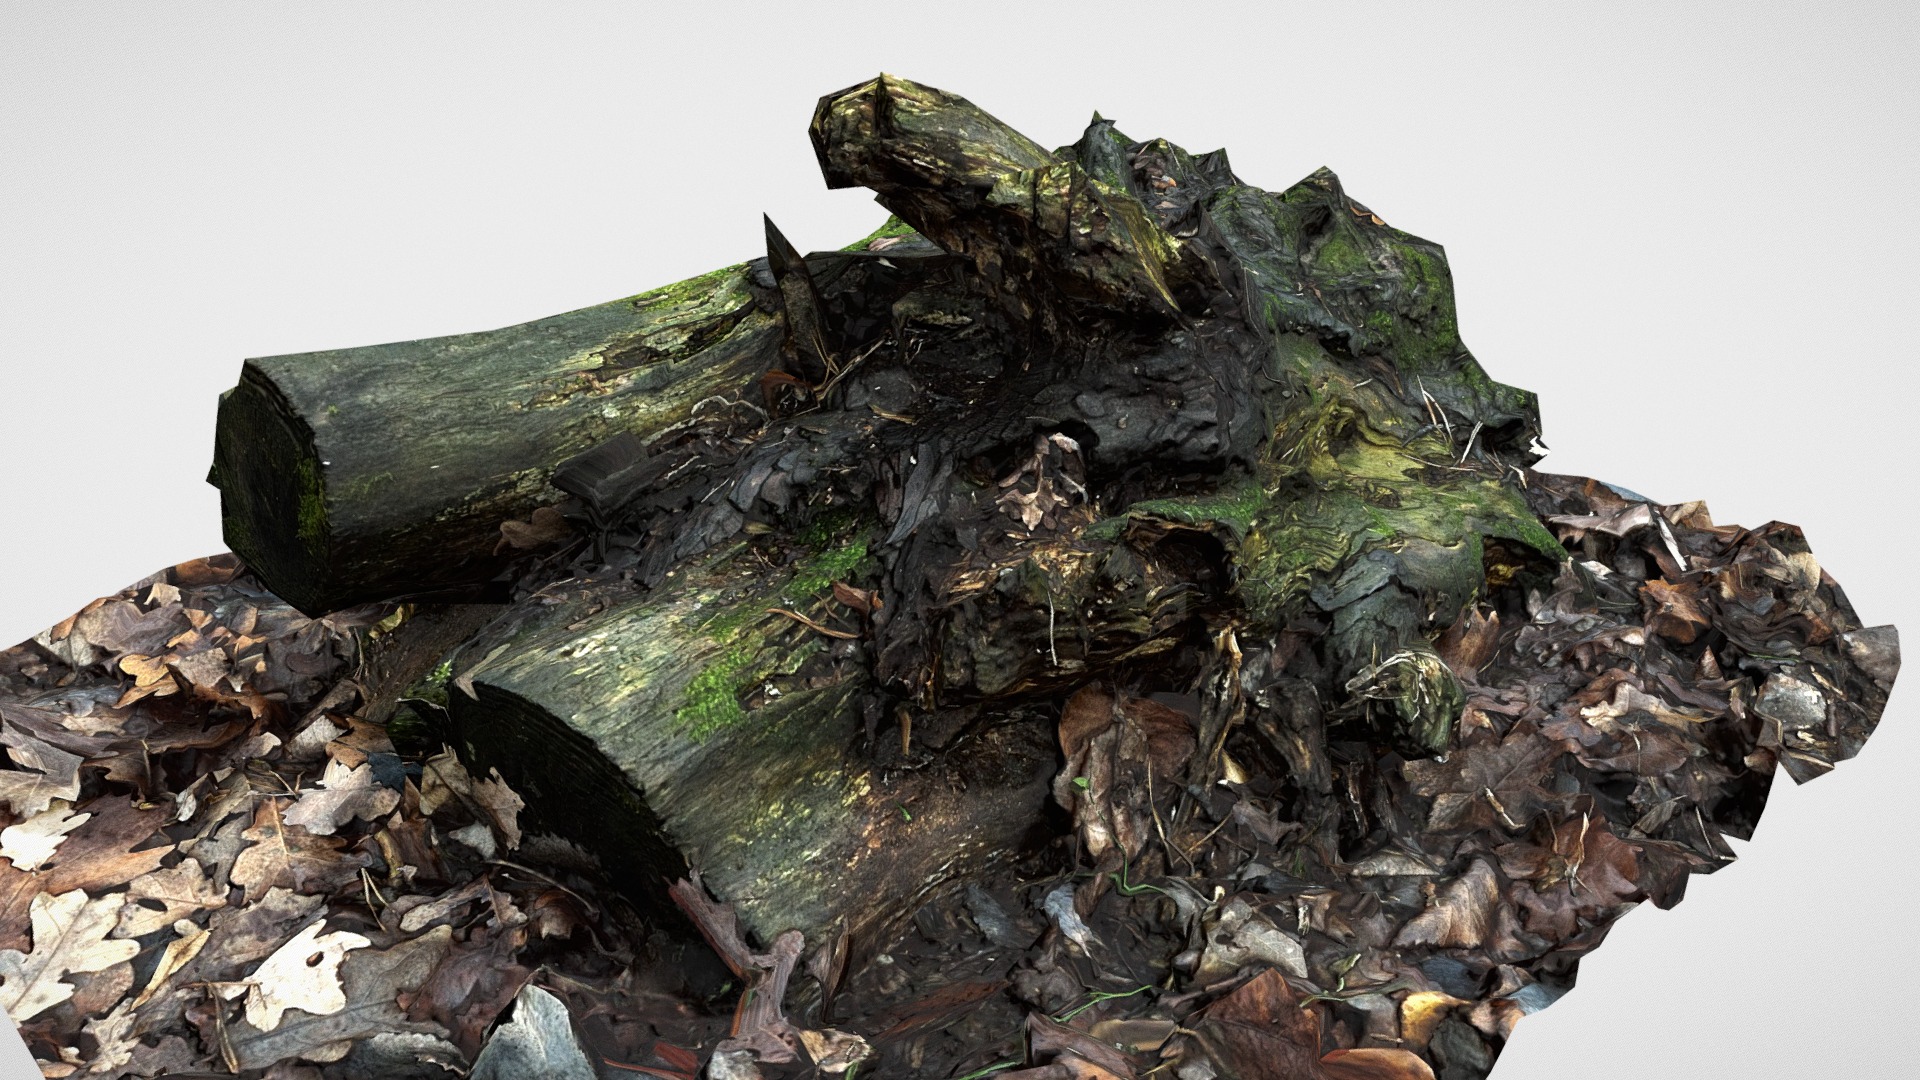 3D model Old rotten log scanned - This is a 3D model of the Old rotten log scanned. The 3D model is about a pile of marijuana.